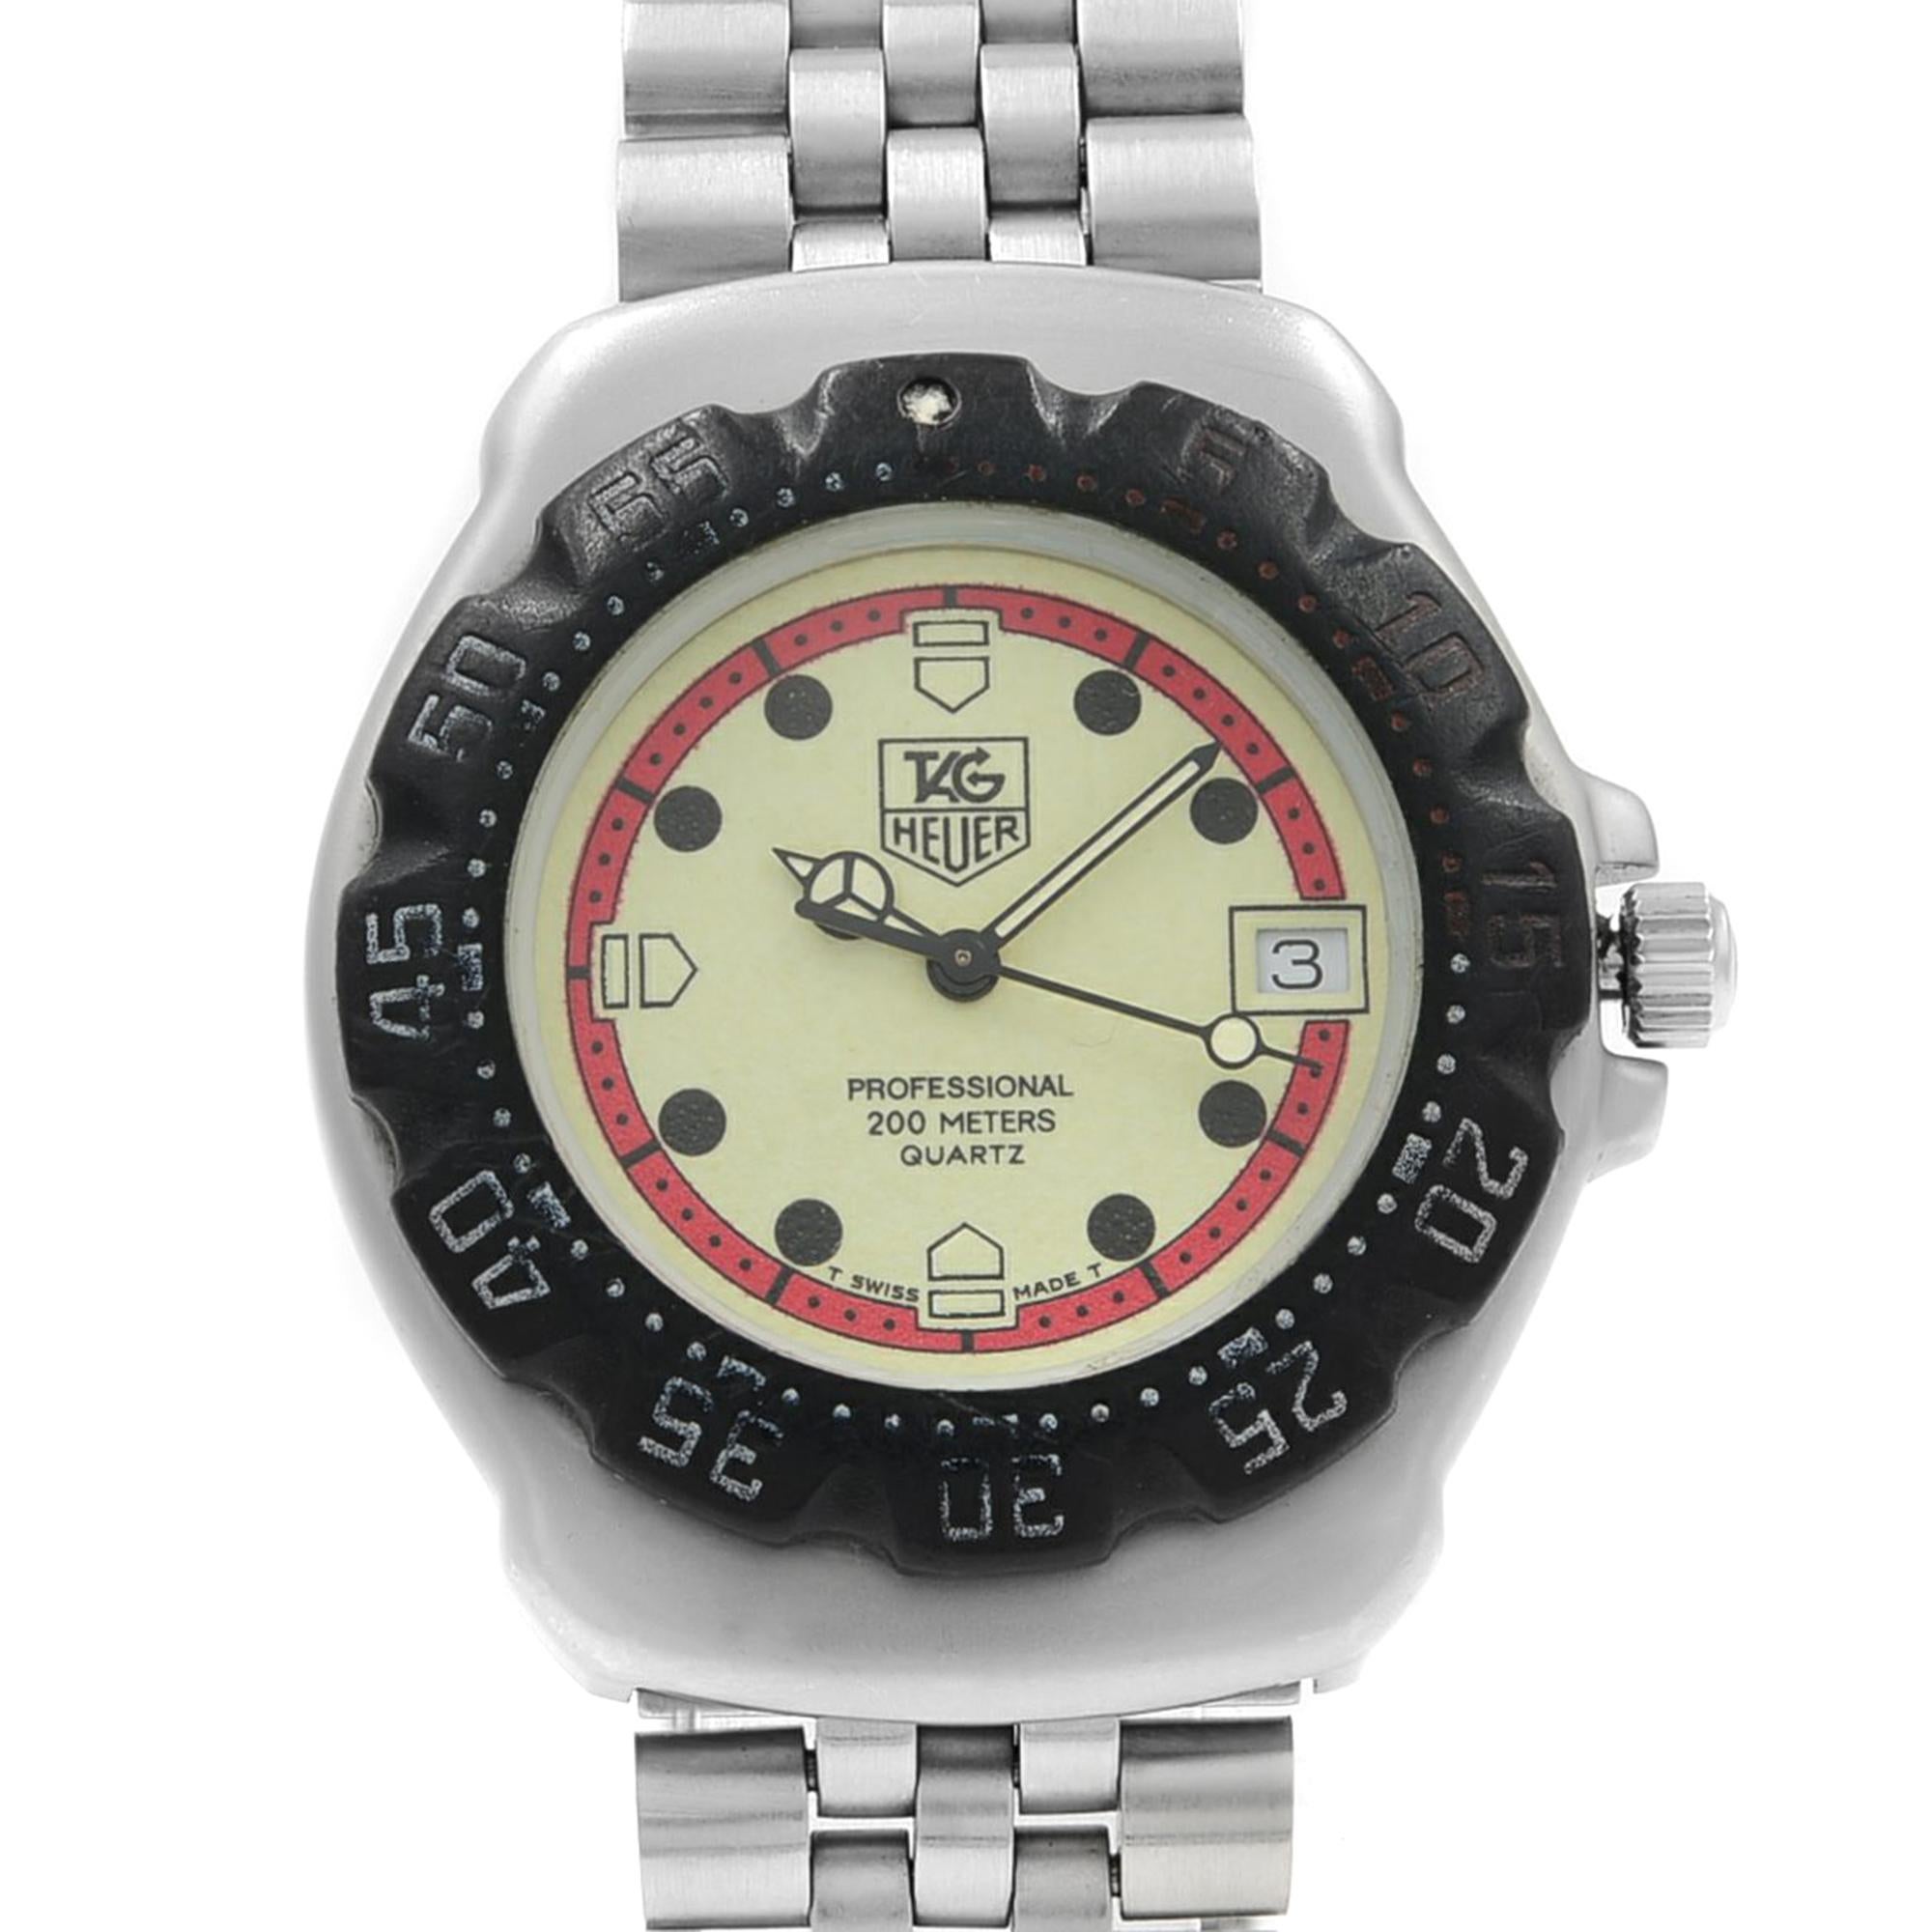 This pre-owned TAG Heuer Formula 1 371.513 is a beautiful Unisex timepiece that is powered by a quartz movement which is cased in a stainless steel case. It has a round shape face, date dial and has hand dots style markers. It is completed with a